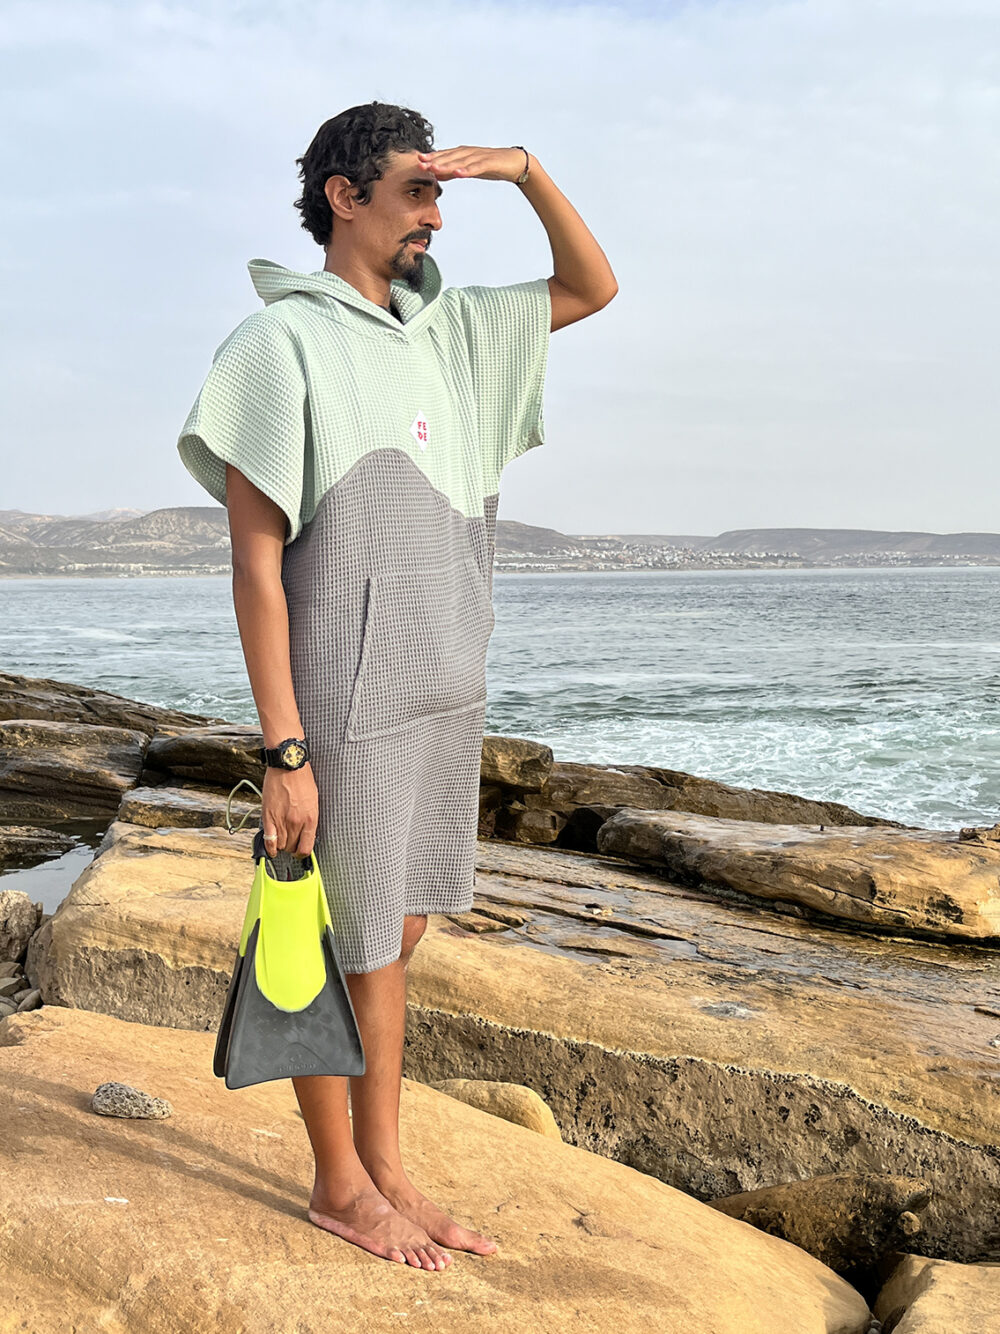 Light Weight Surf poncho - 100% natural cotton changing cape